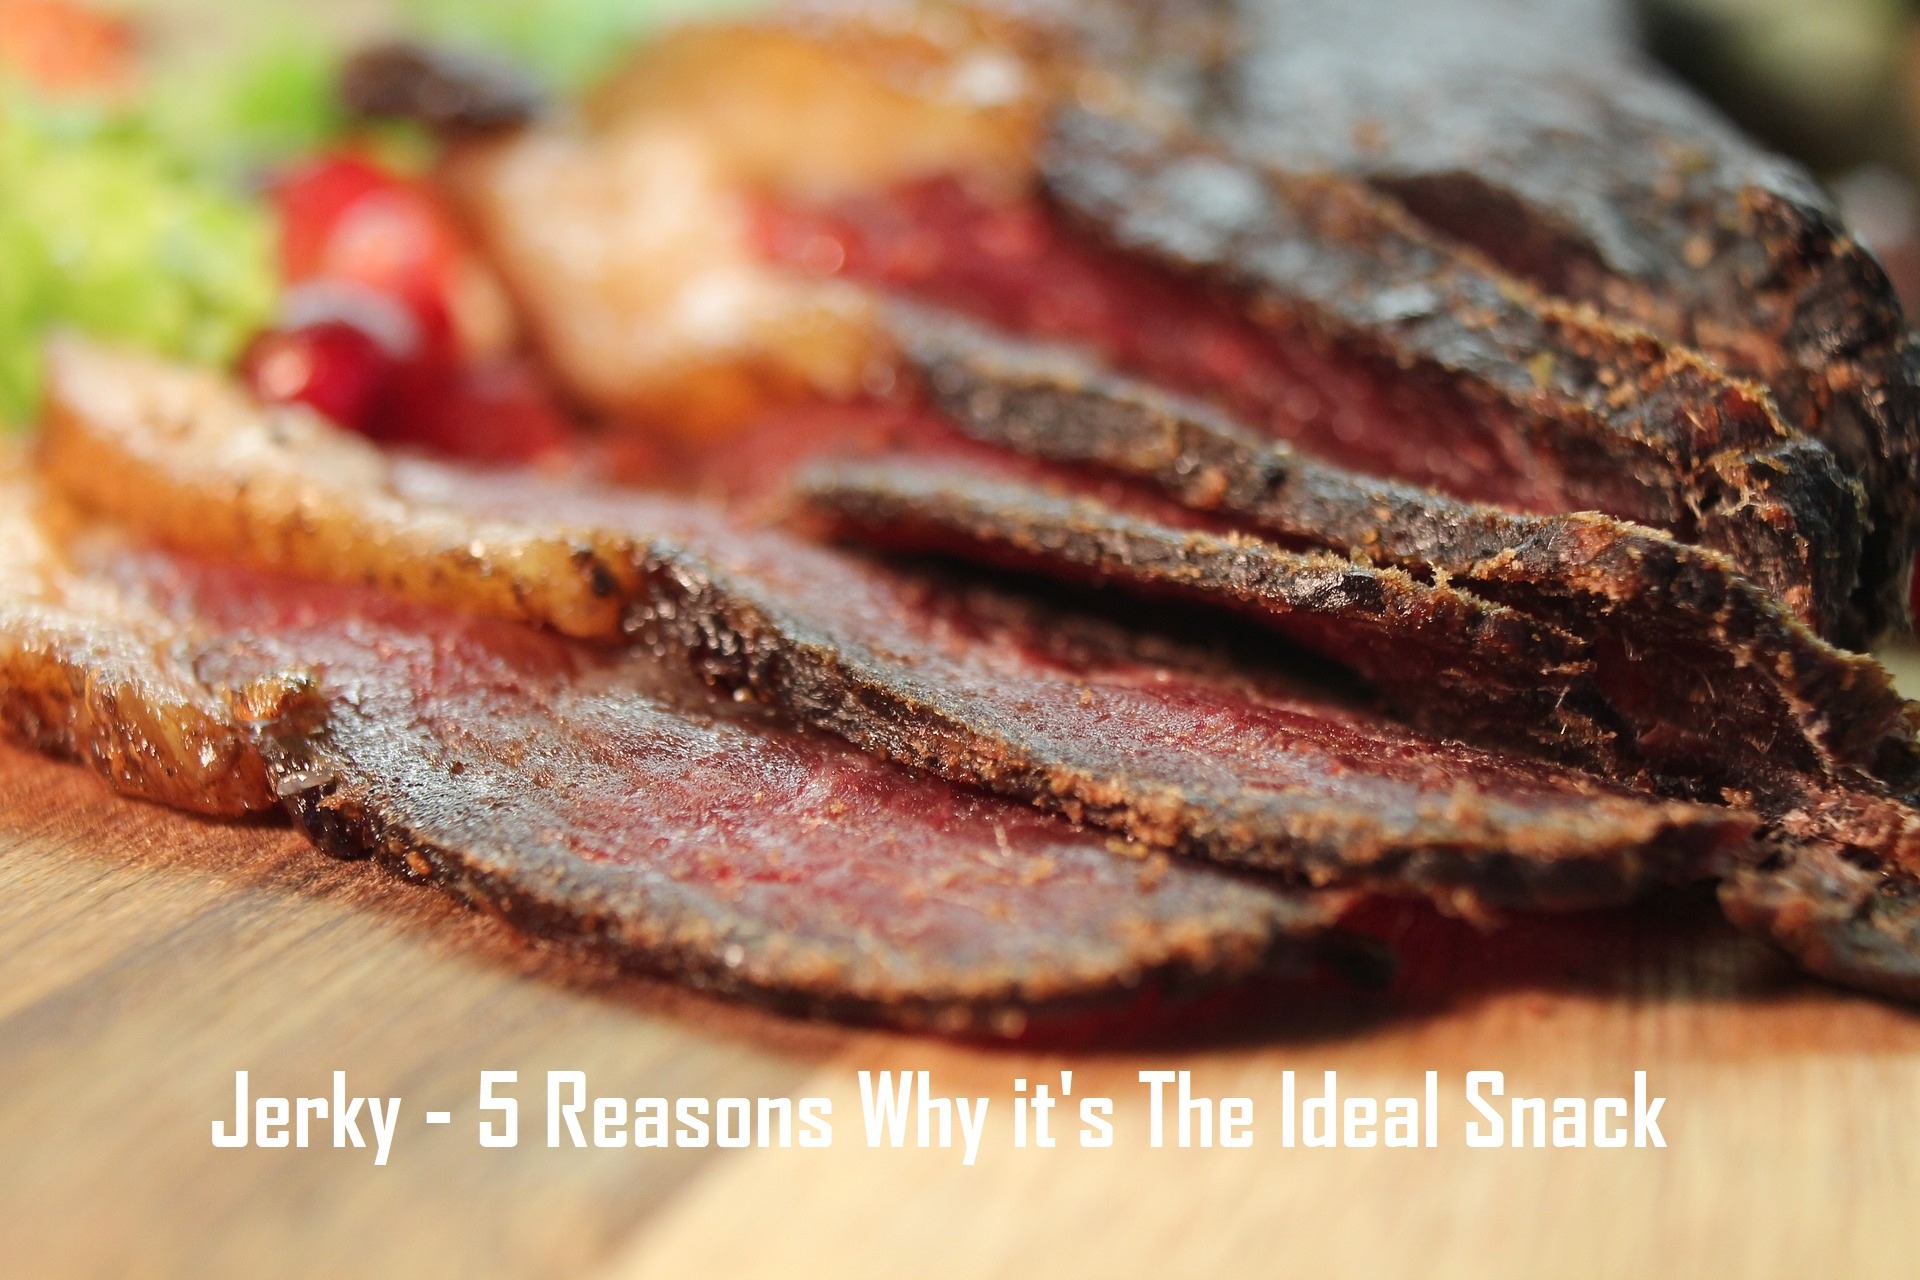 5 Reasons why Jerky is The Ideal Snackfood